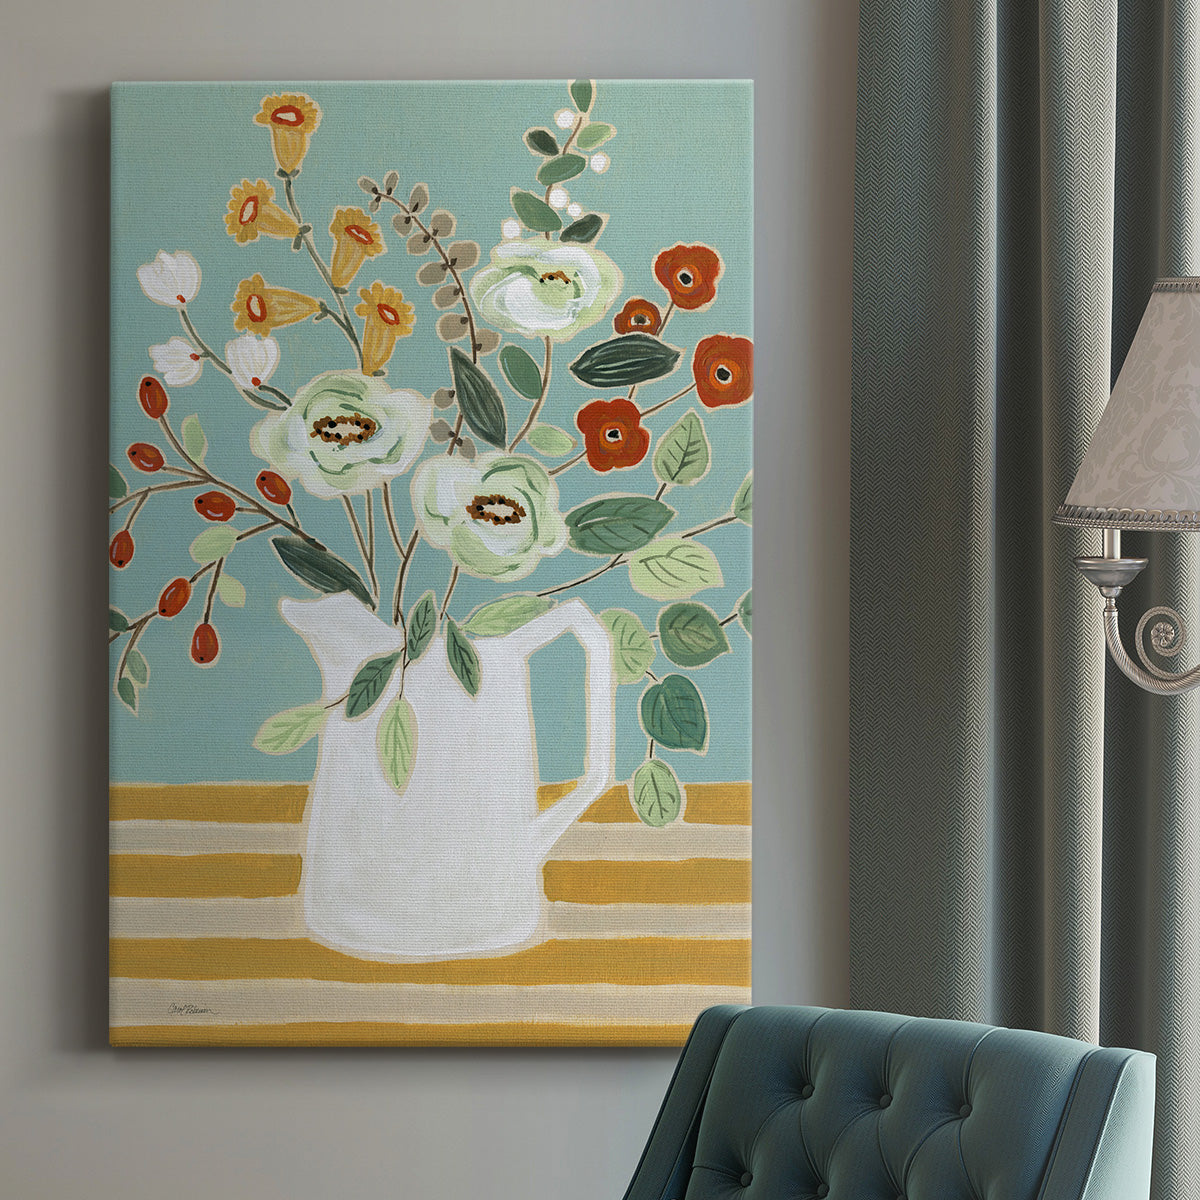 Joyful Blossoms II Premium Gallery Wrapped Canvas - Ready to Hang